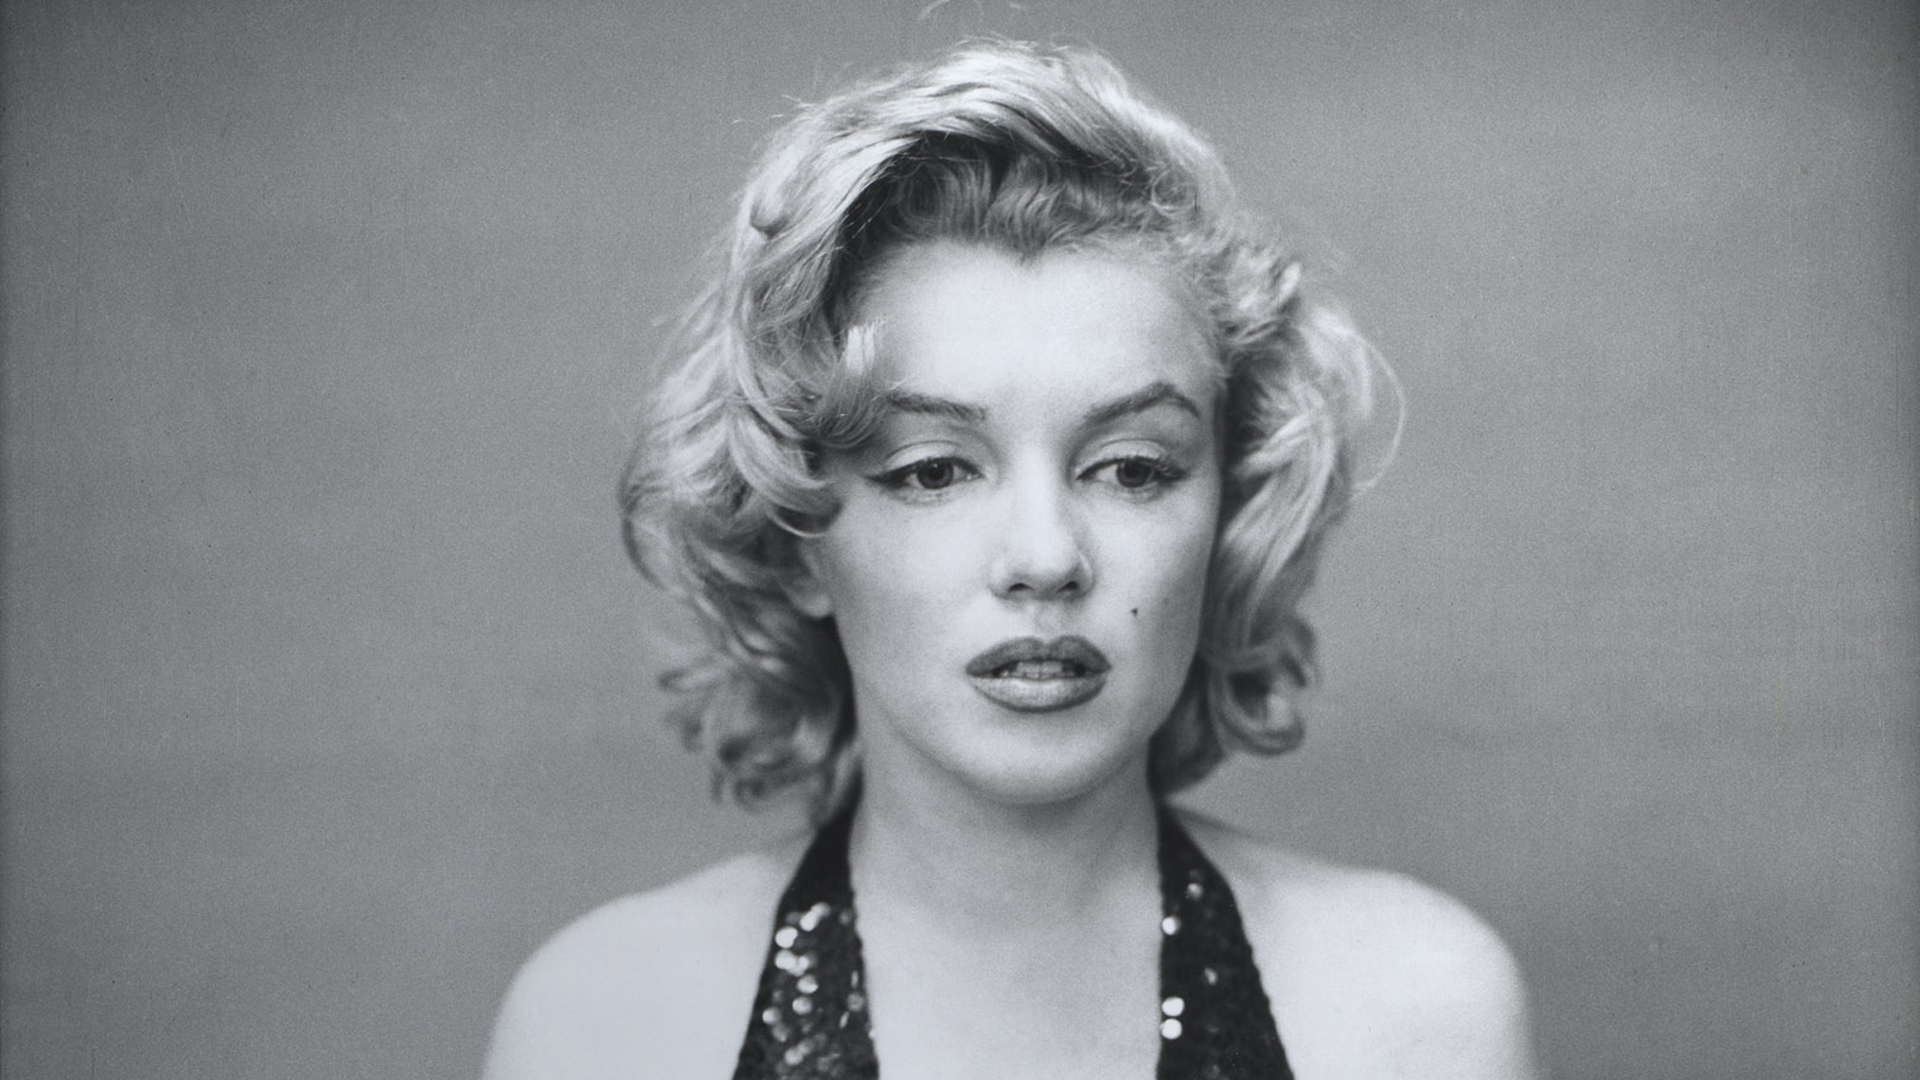 Marilyn Monroe Wallpaper Image Photos Pictures Background